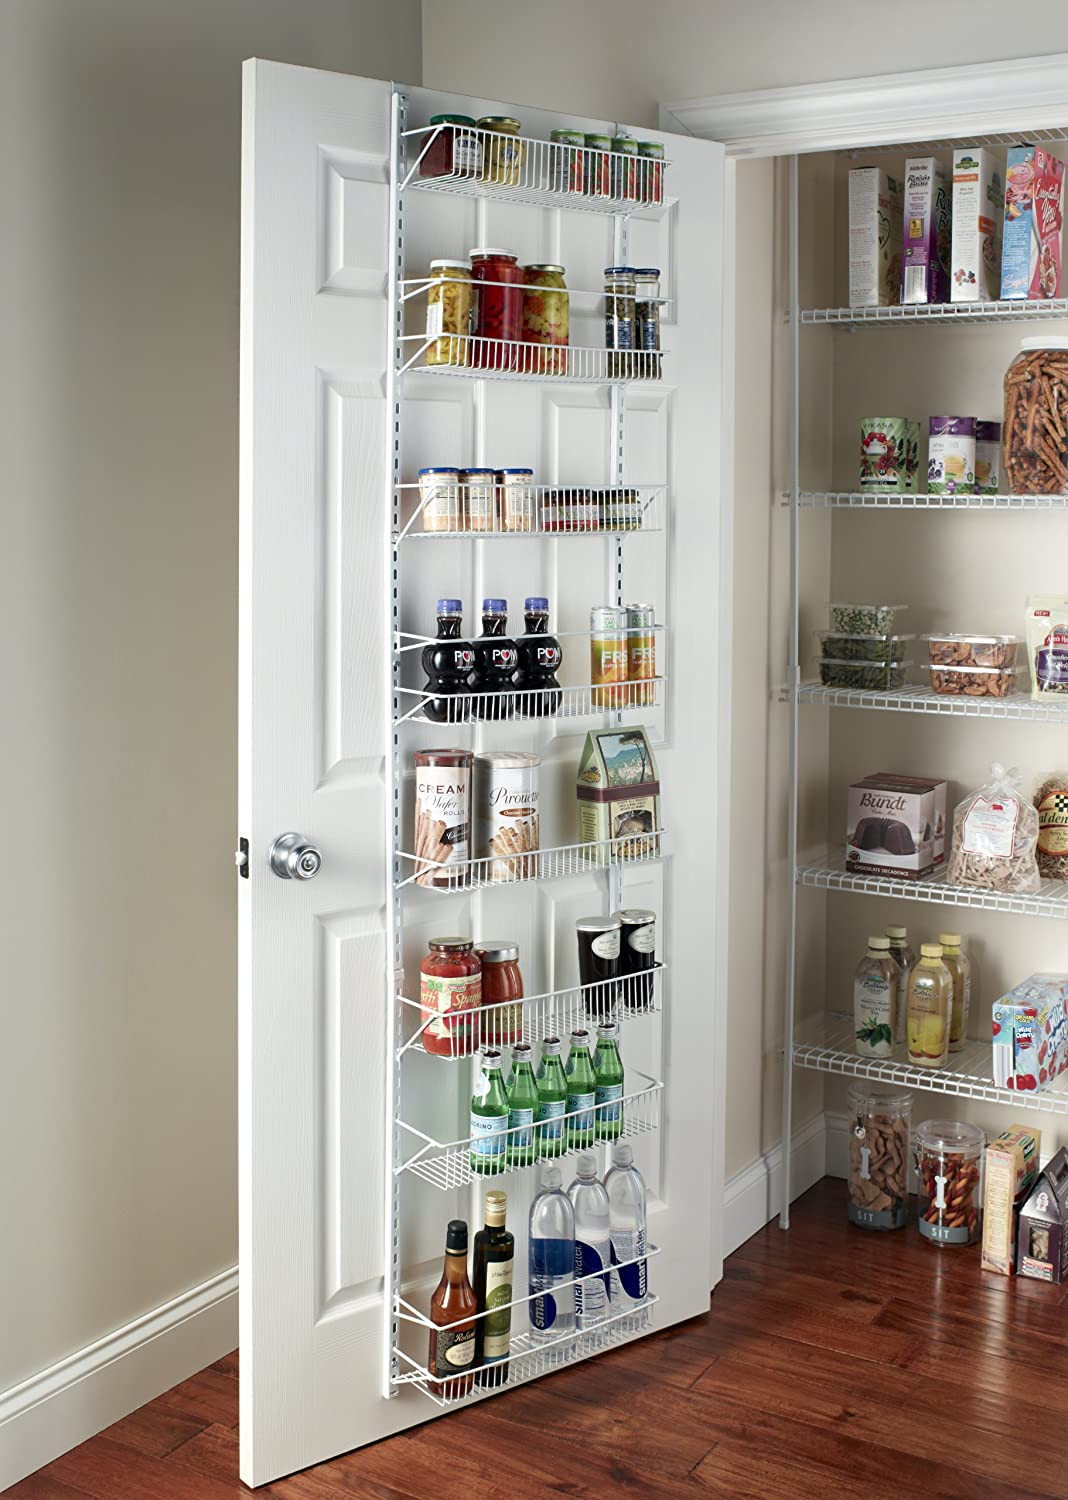 Kitchen Closet Organizers
 Over the Door Pantry Organizer with Hooks